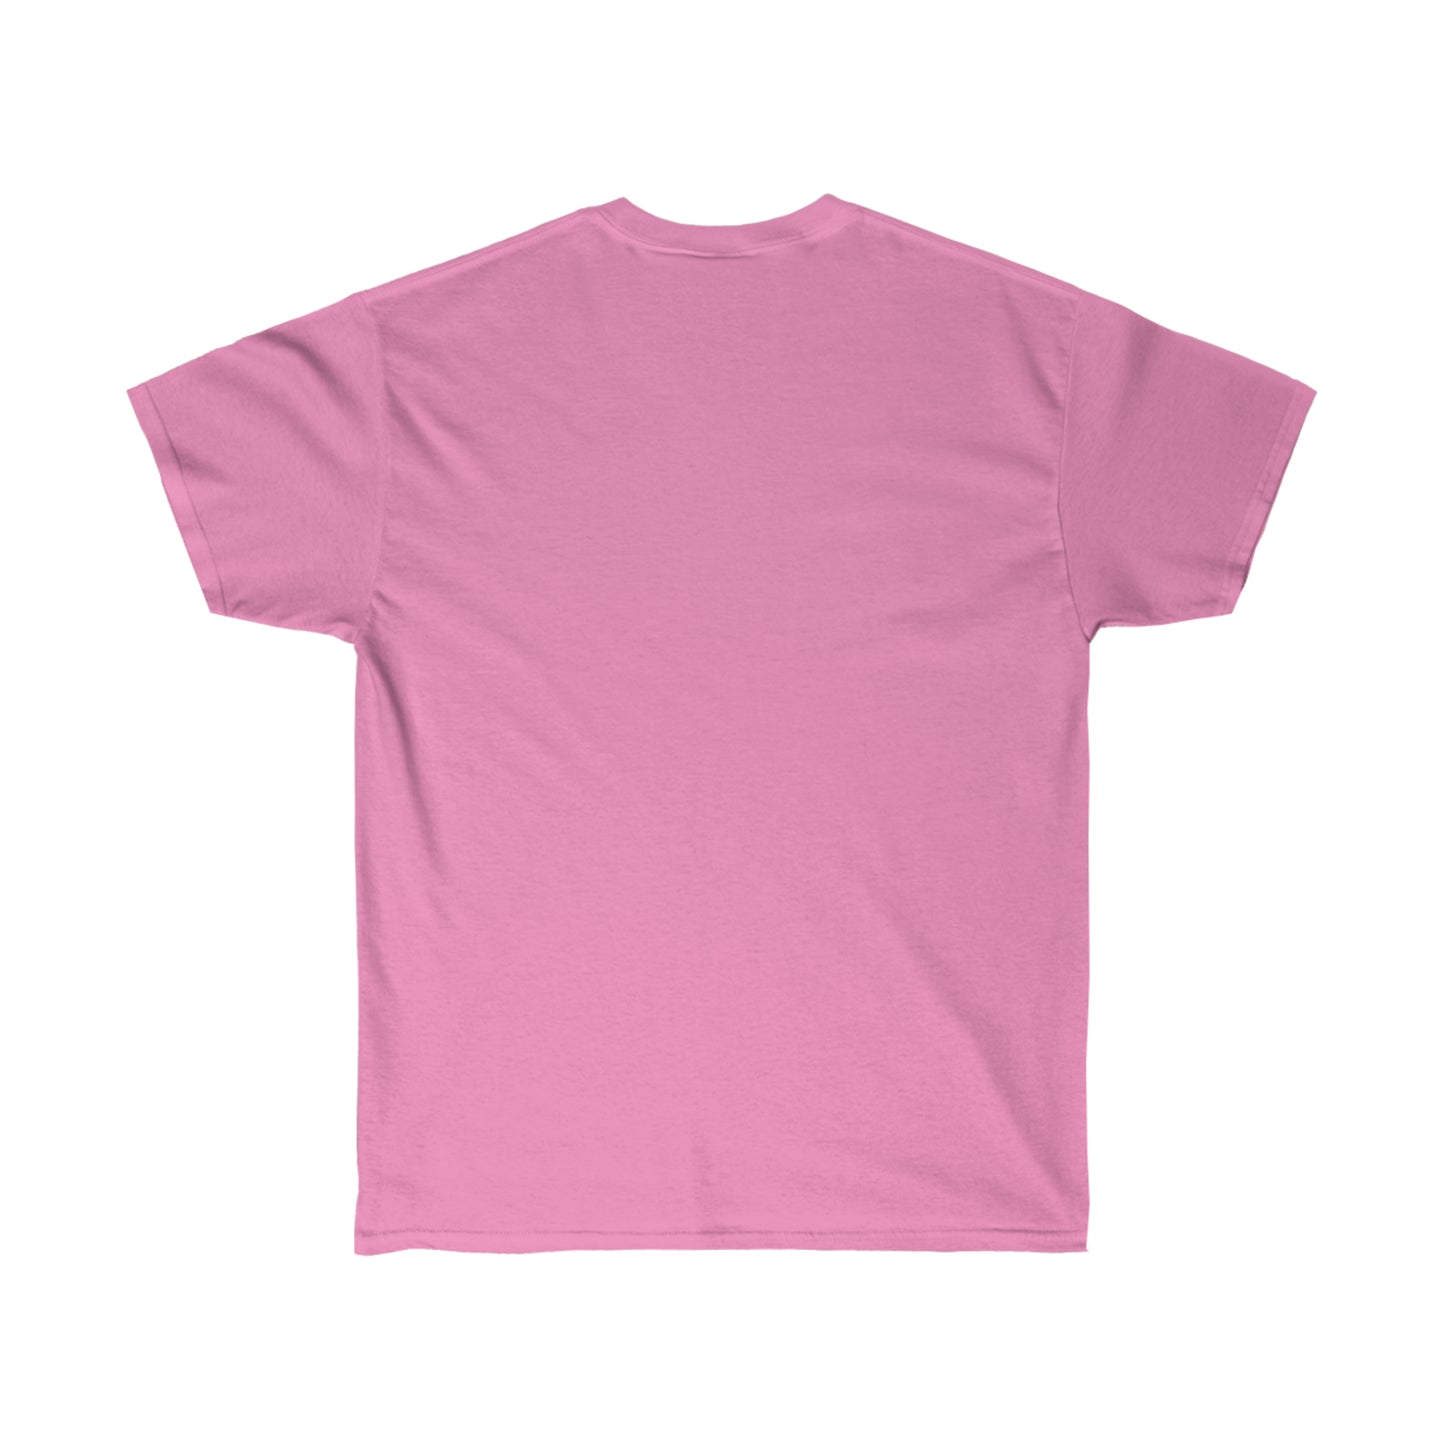 Trans Rights are Human Rights Unisex Ultra Cotton Tee.